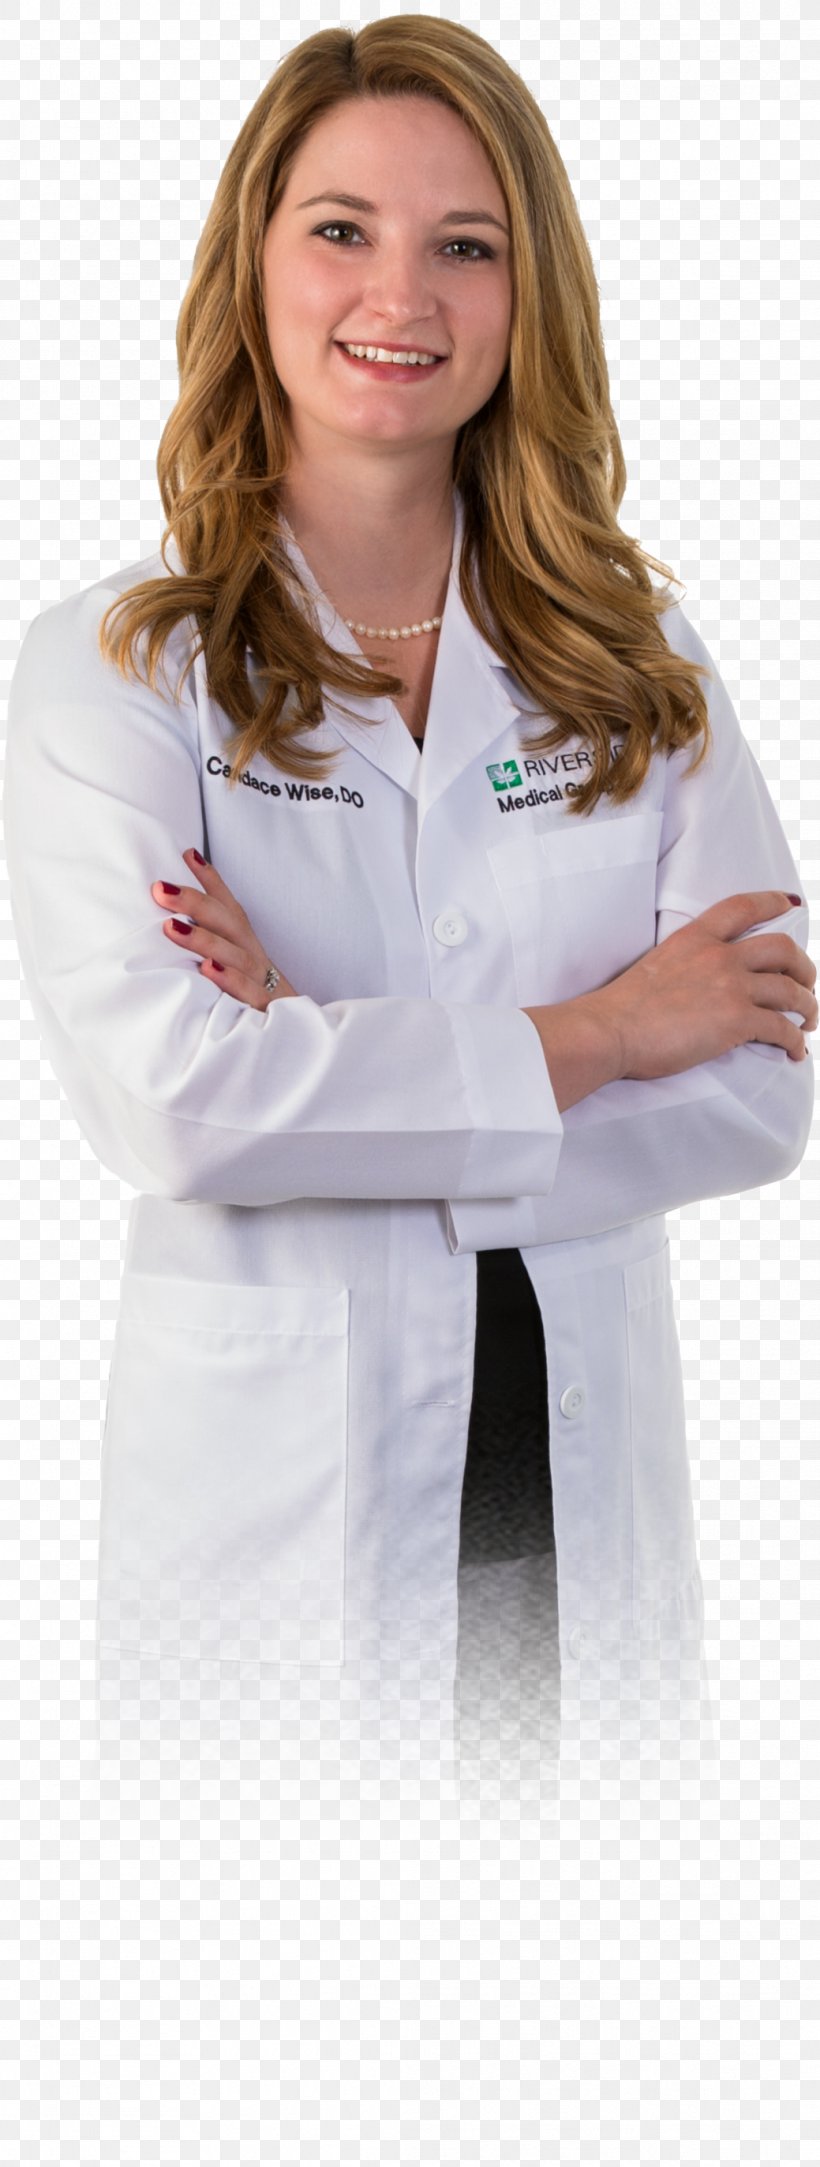 Lab Coats Physician Assistant Nurse Practitioner Stethoscope, PNG, 1039x2746px, Lab Coats, Arm, Blouse, Dress Shirt, General Practitioner Download Free